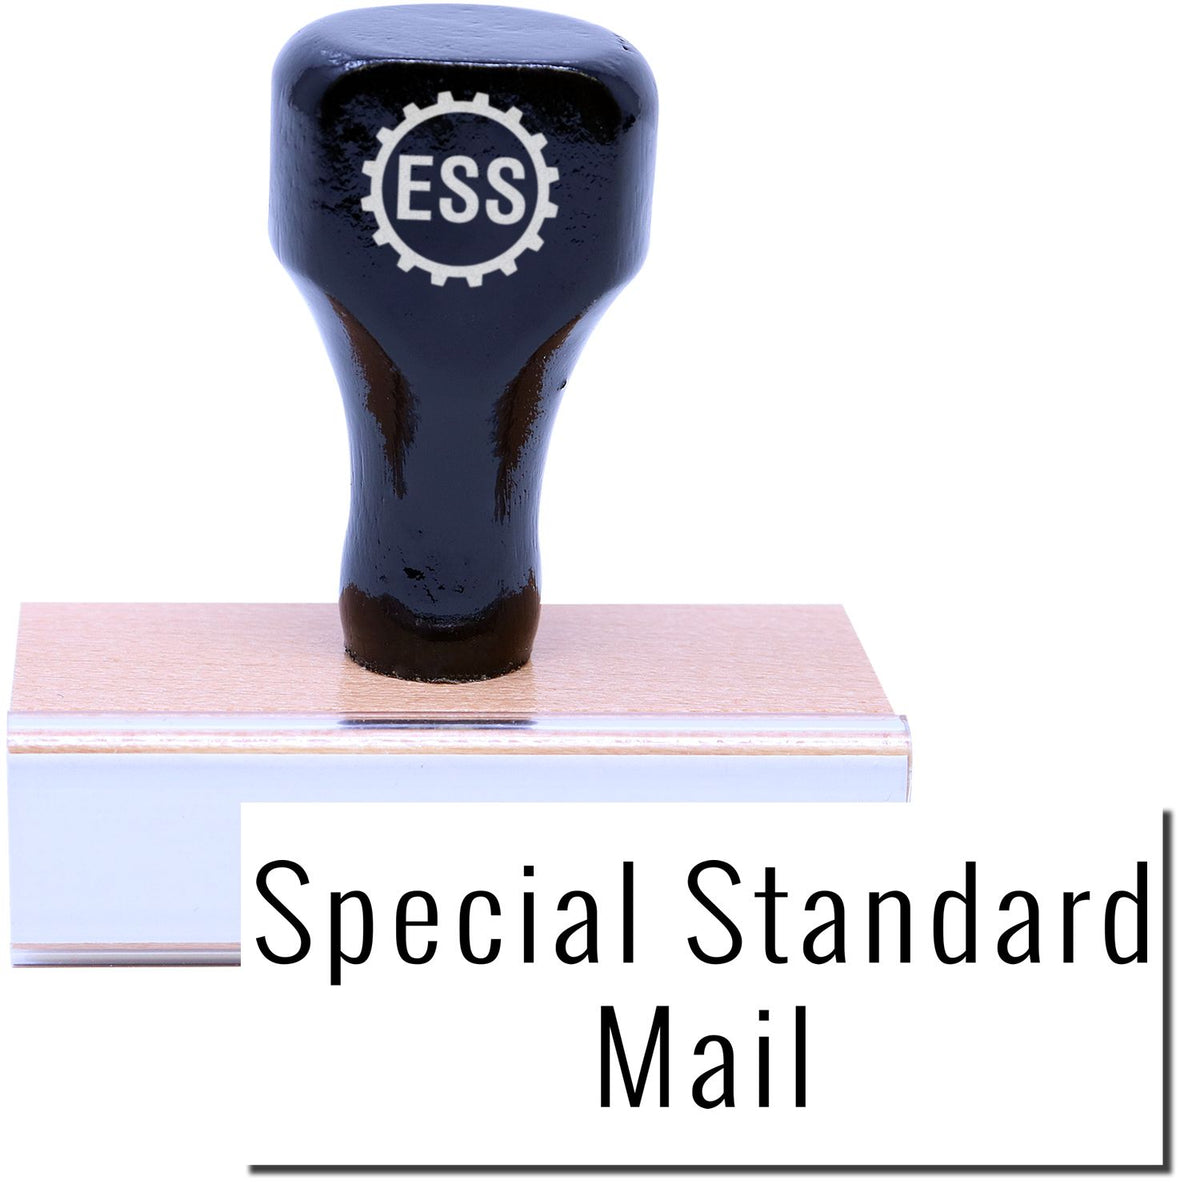 A stock office rubber stamp with a stamped image showing how the text &quot;Special Standard Mail&quot; is displayed after stamping.